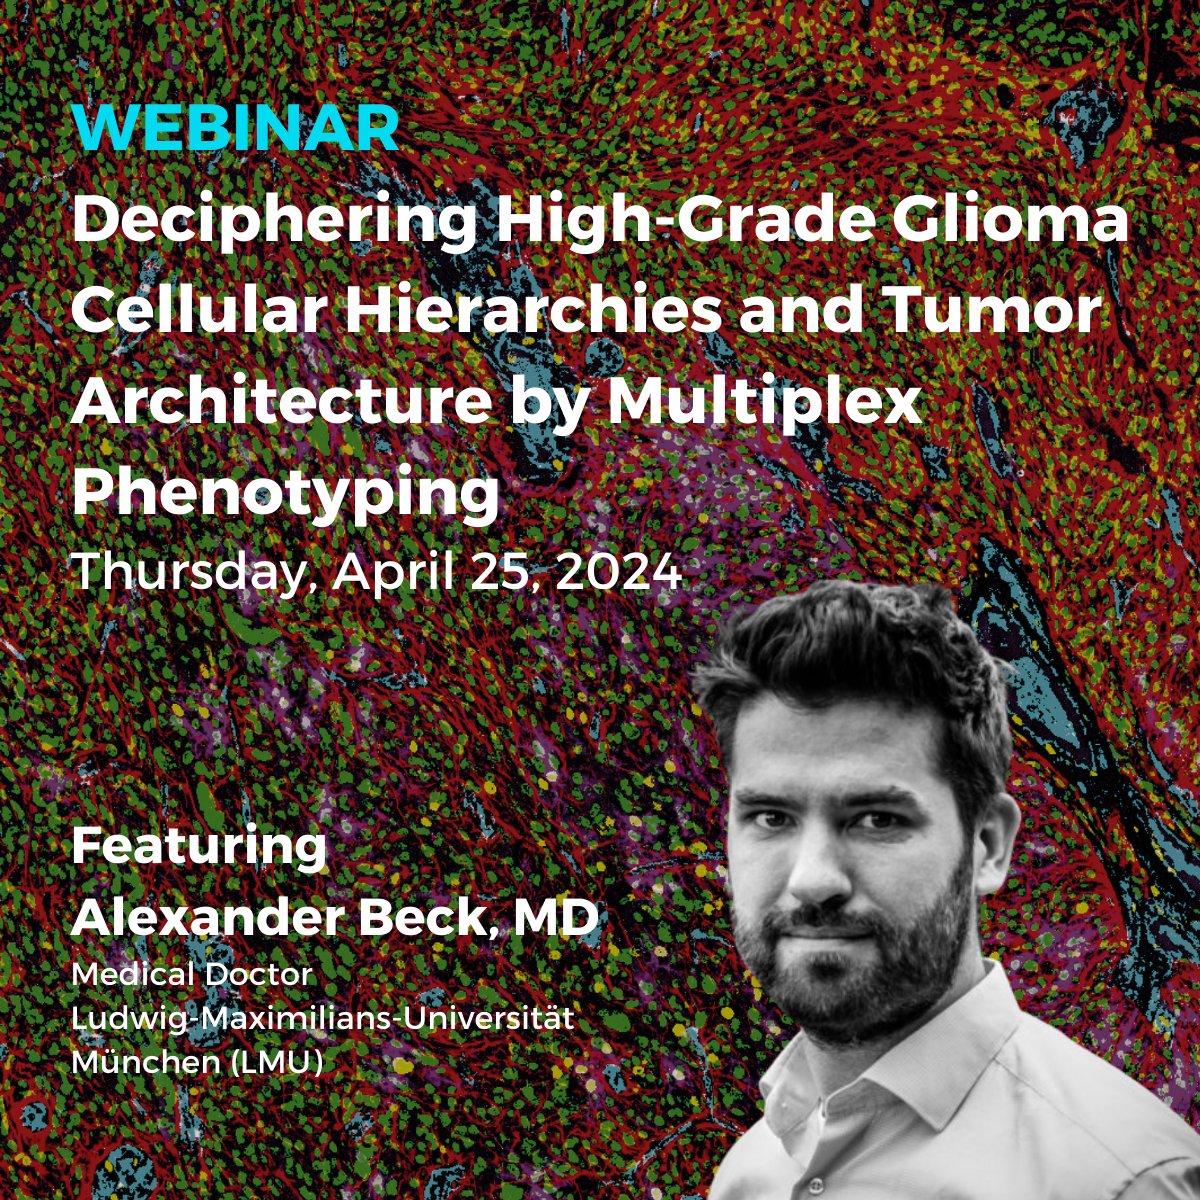 Don't forget to register for our webinar tomorrow to learn what #multiplex cell phenotyping tells us about malignant #braintumors! This webinar will take place twice on April 25: ✔️ Europe Time bit.ly/4ayN7oA ✔️ North America Time bit.ly/49yTfw2 #gliomas